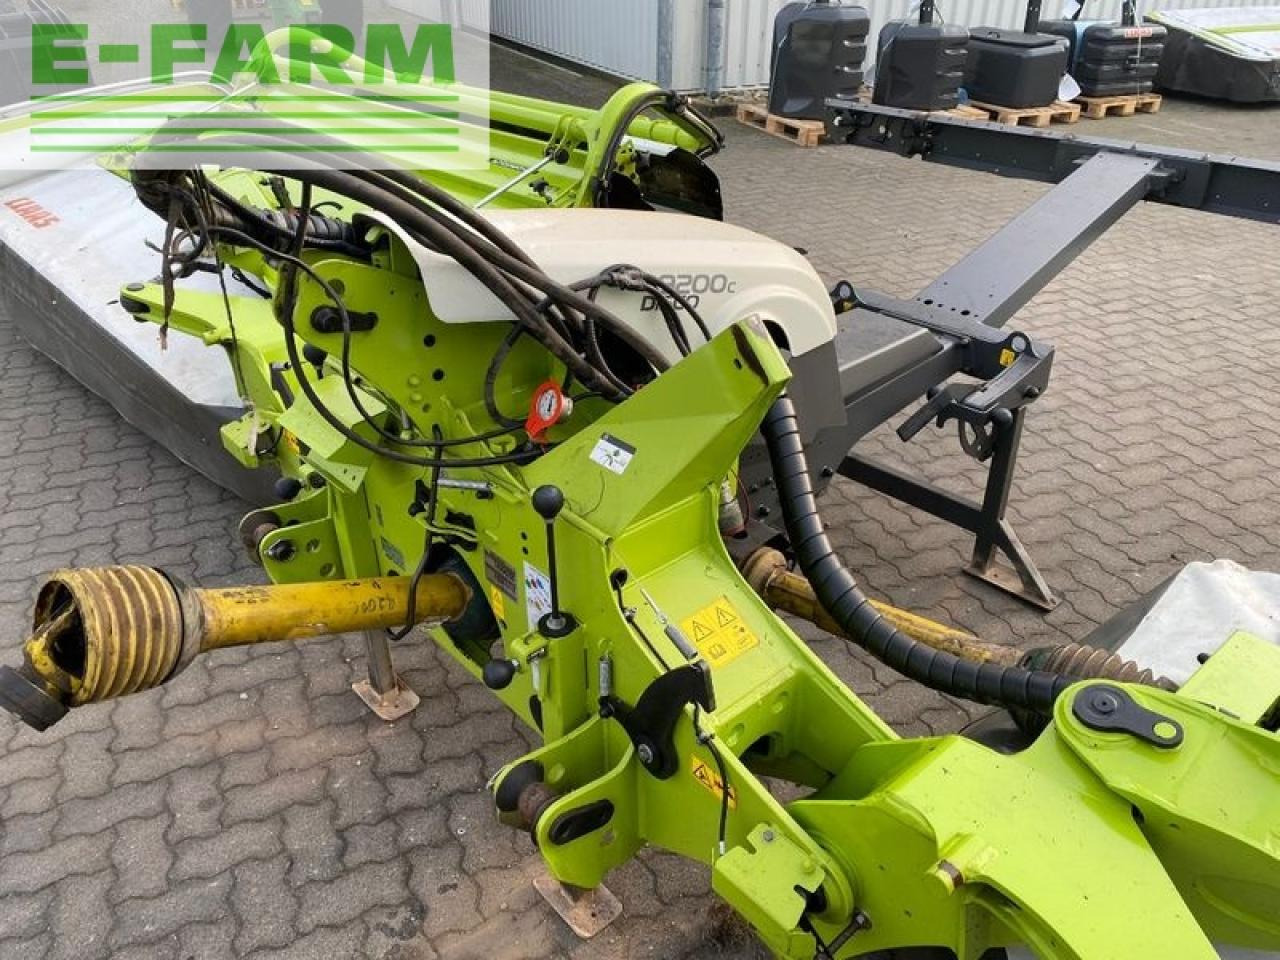 Mower CLAAS disco 9200 c as: picture 8